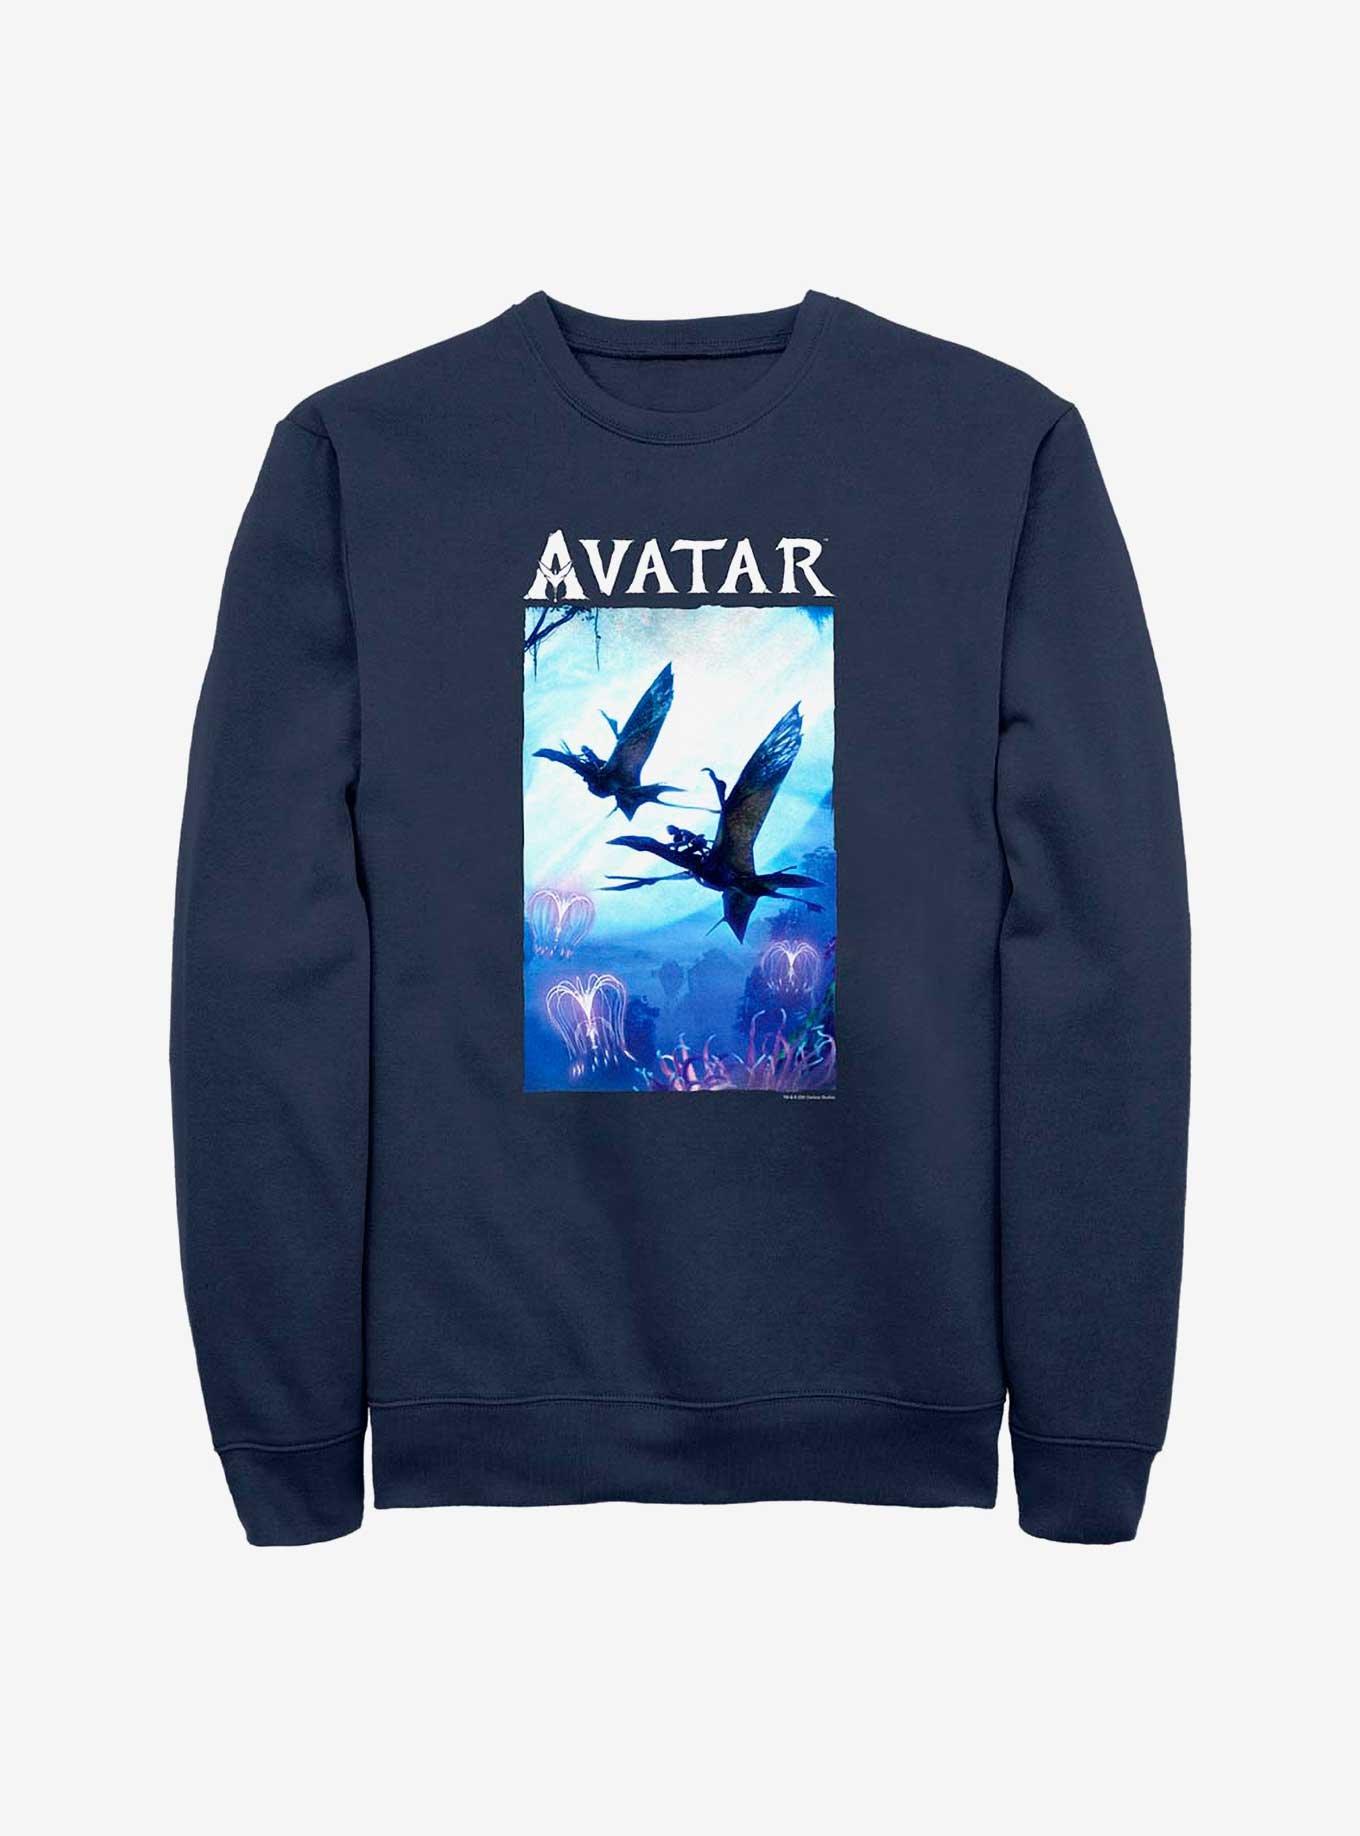 Avatar: The Way of Water Air Time Poster Sweatshirt, NAVY, hi-res